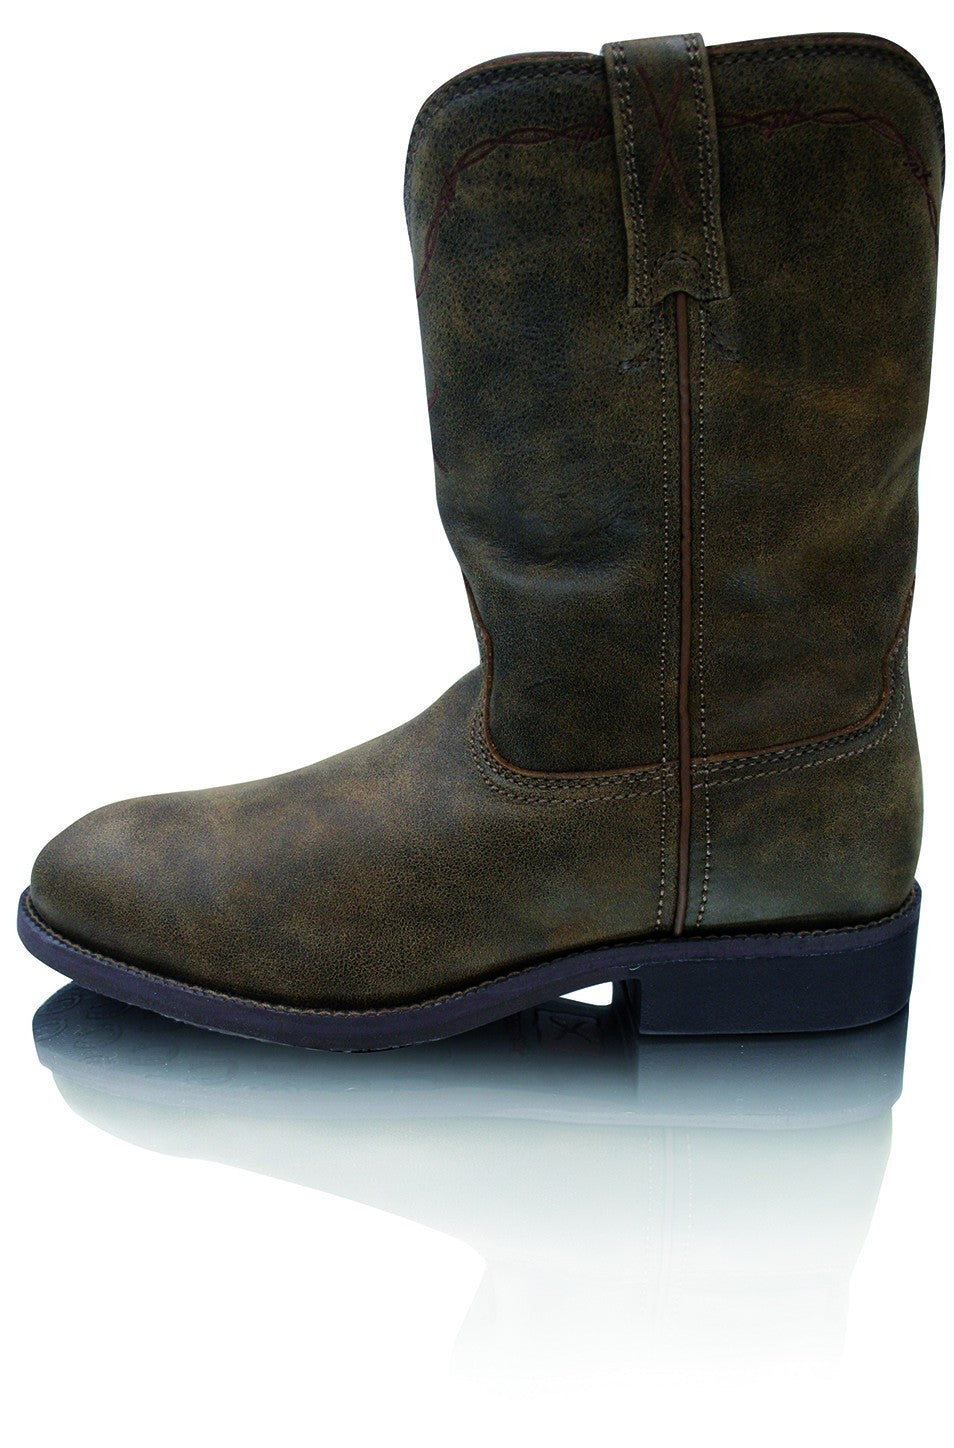 Twisted X Mens Roper Boots - Bomber - TCMRP0002